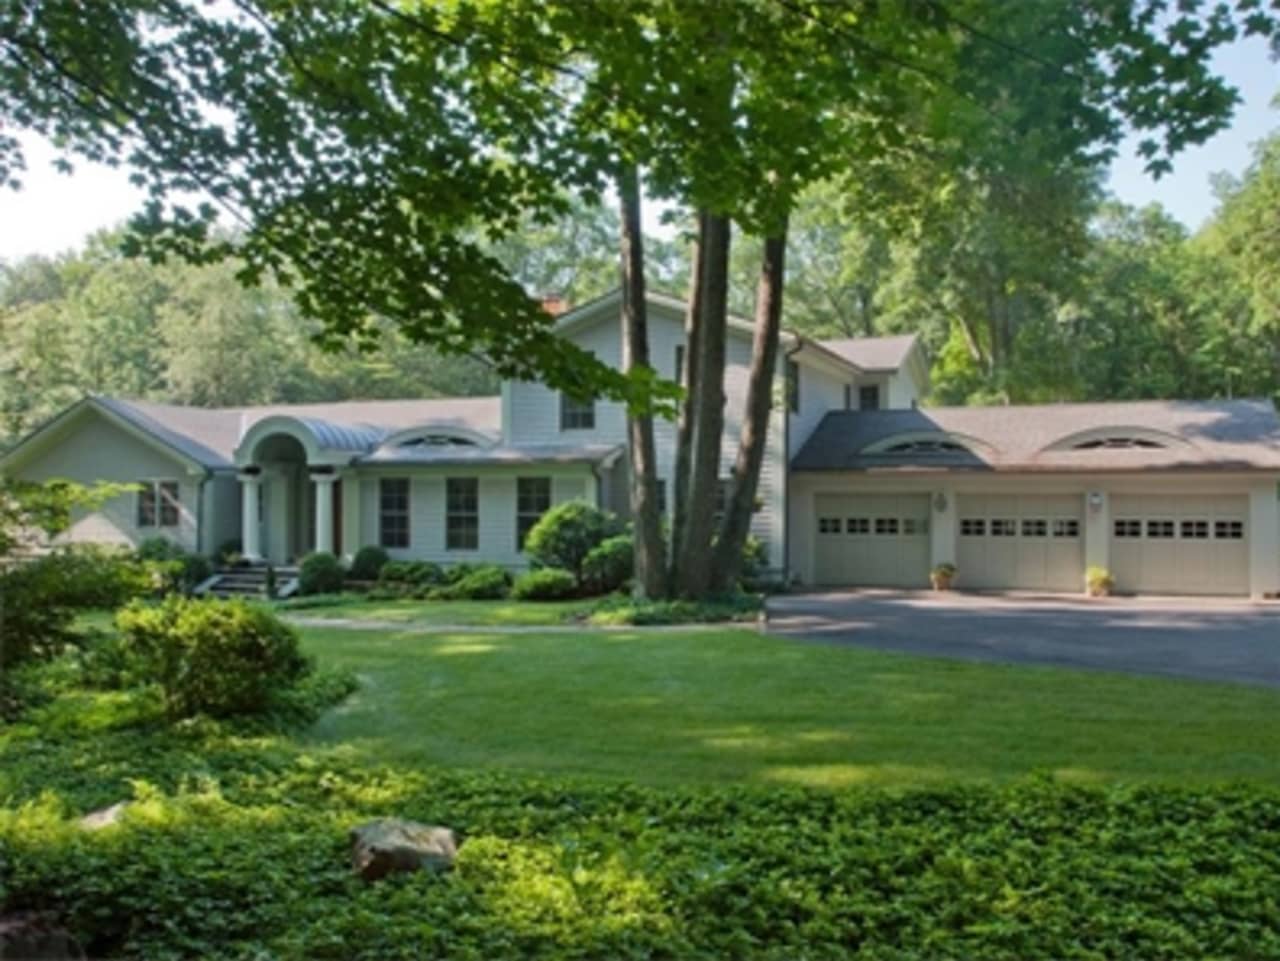 The home at 98 Dogwood Lane in New Canaan will be open to the public on Sunday from 1 to 3 p.m. 